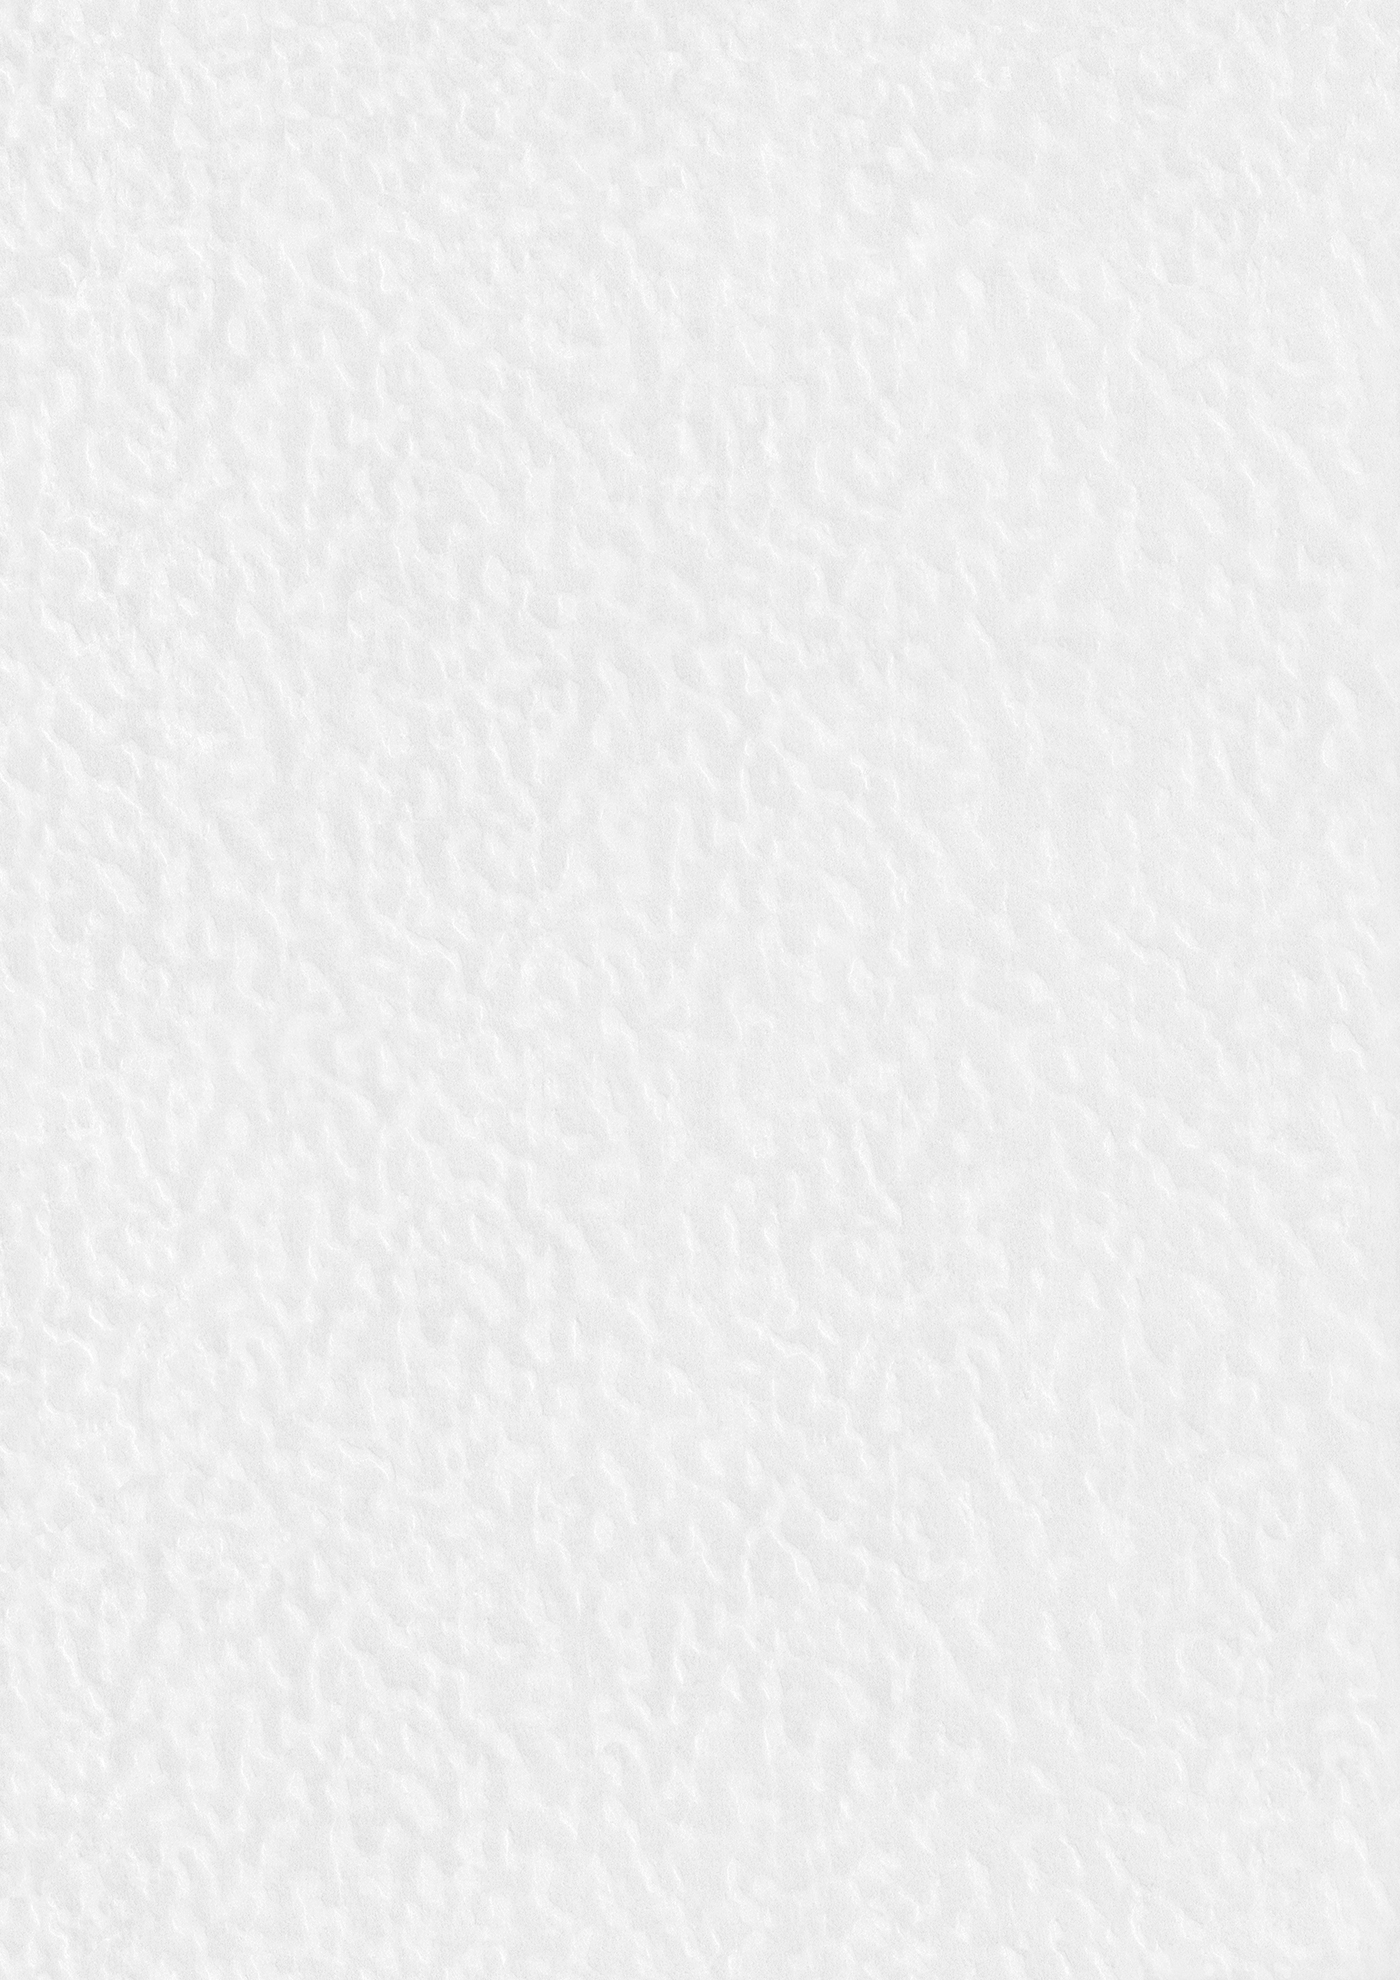 26 White Paper Background Textures DOWNLOAD on Behance